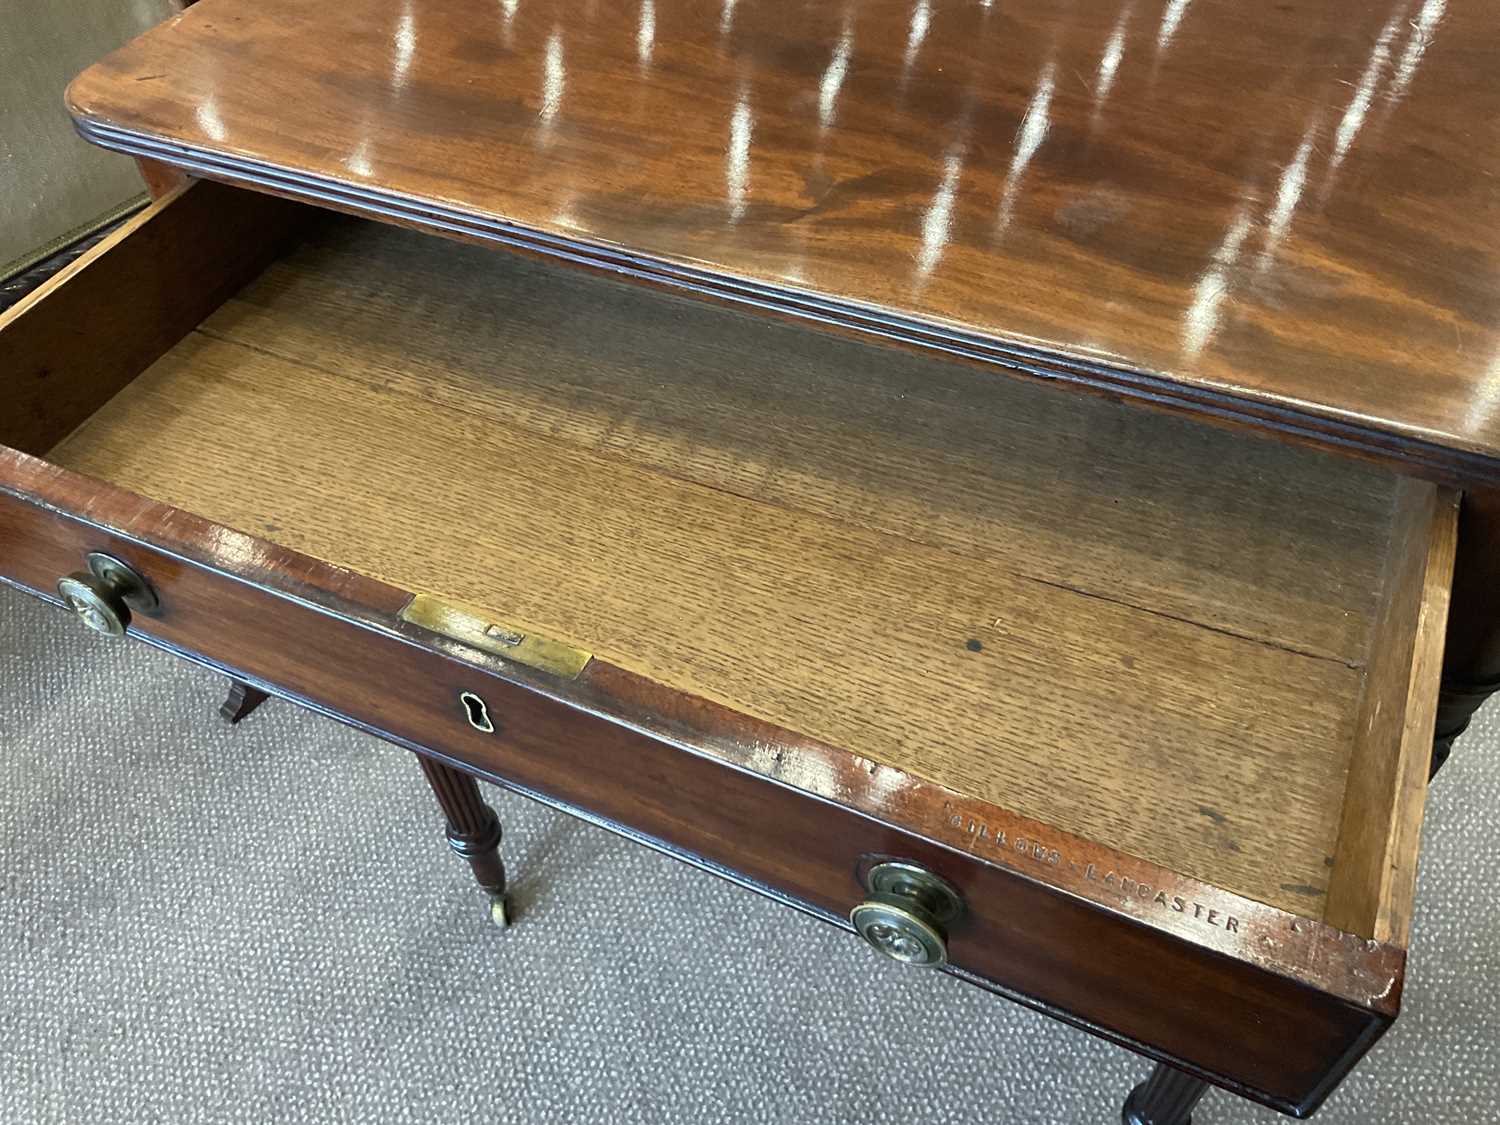 An Early 19th Century Mahogany Chamber Table, by Gillows of Lancaster, with pivotring lid to enclose - Image 5 of 6